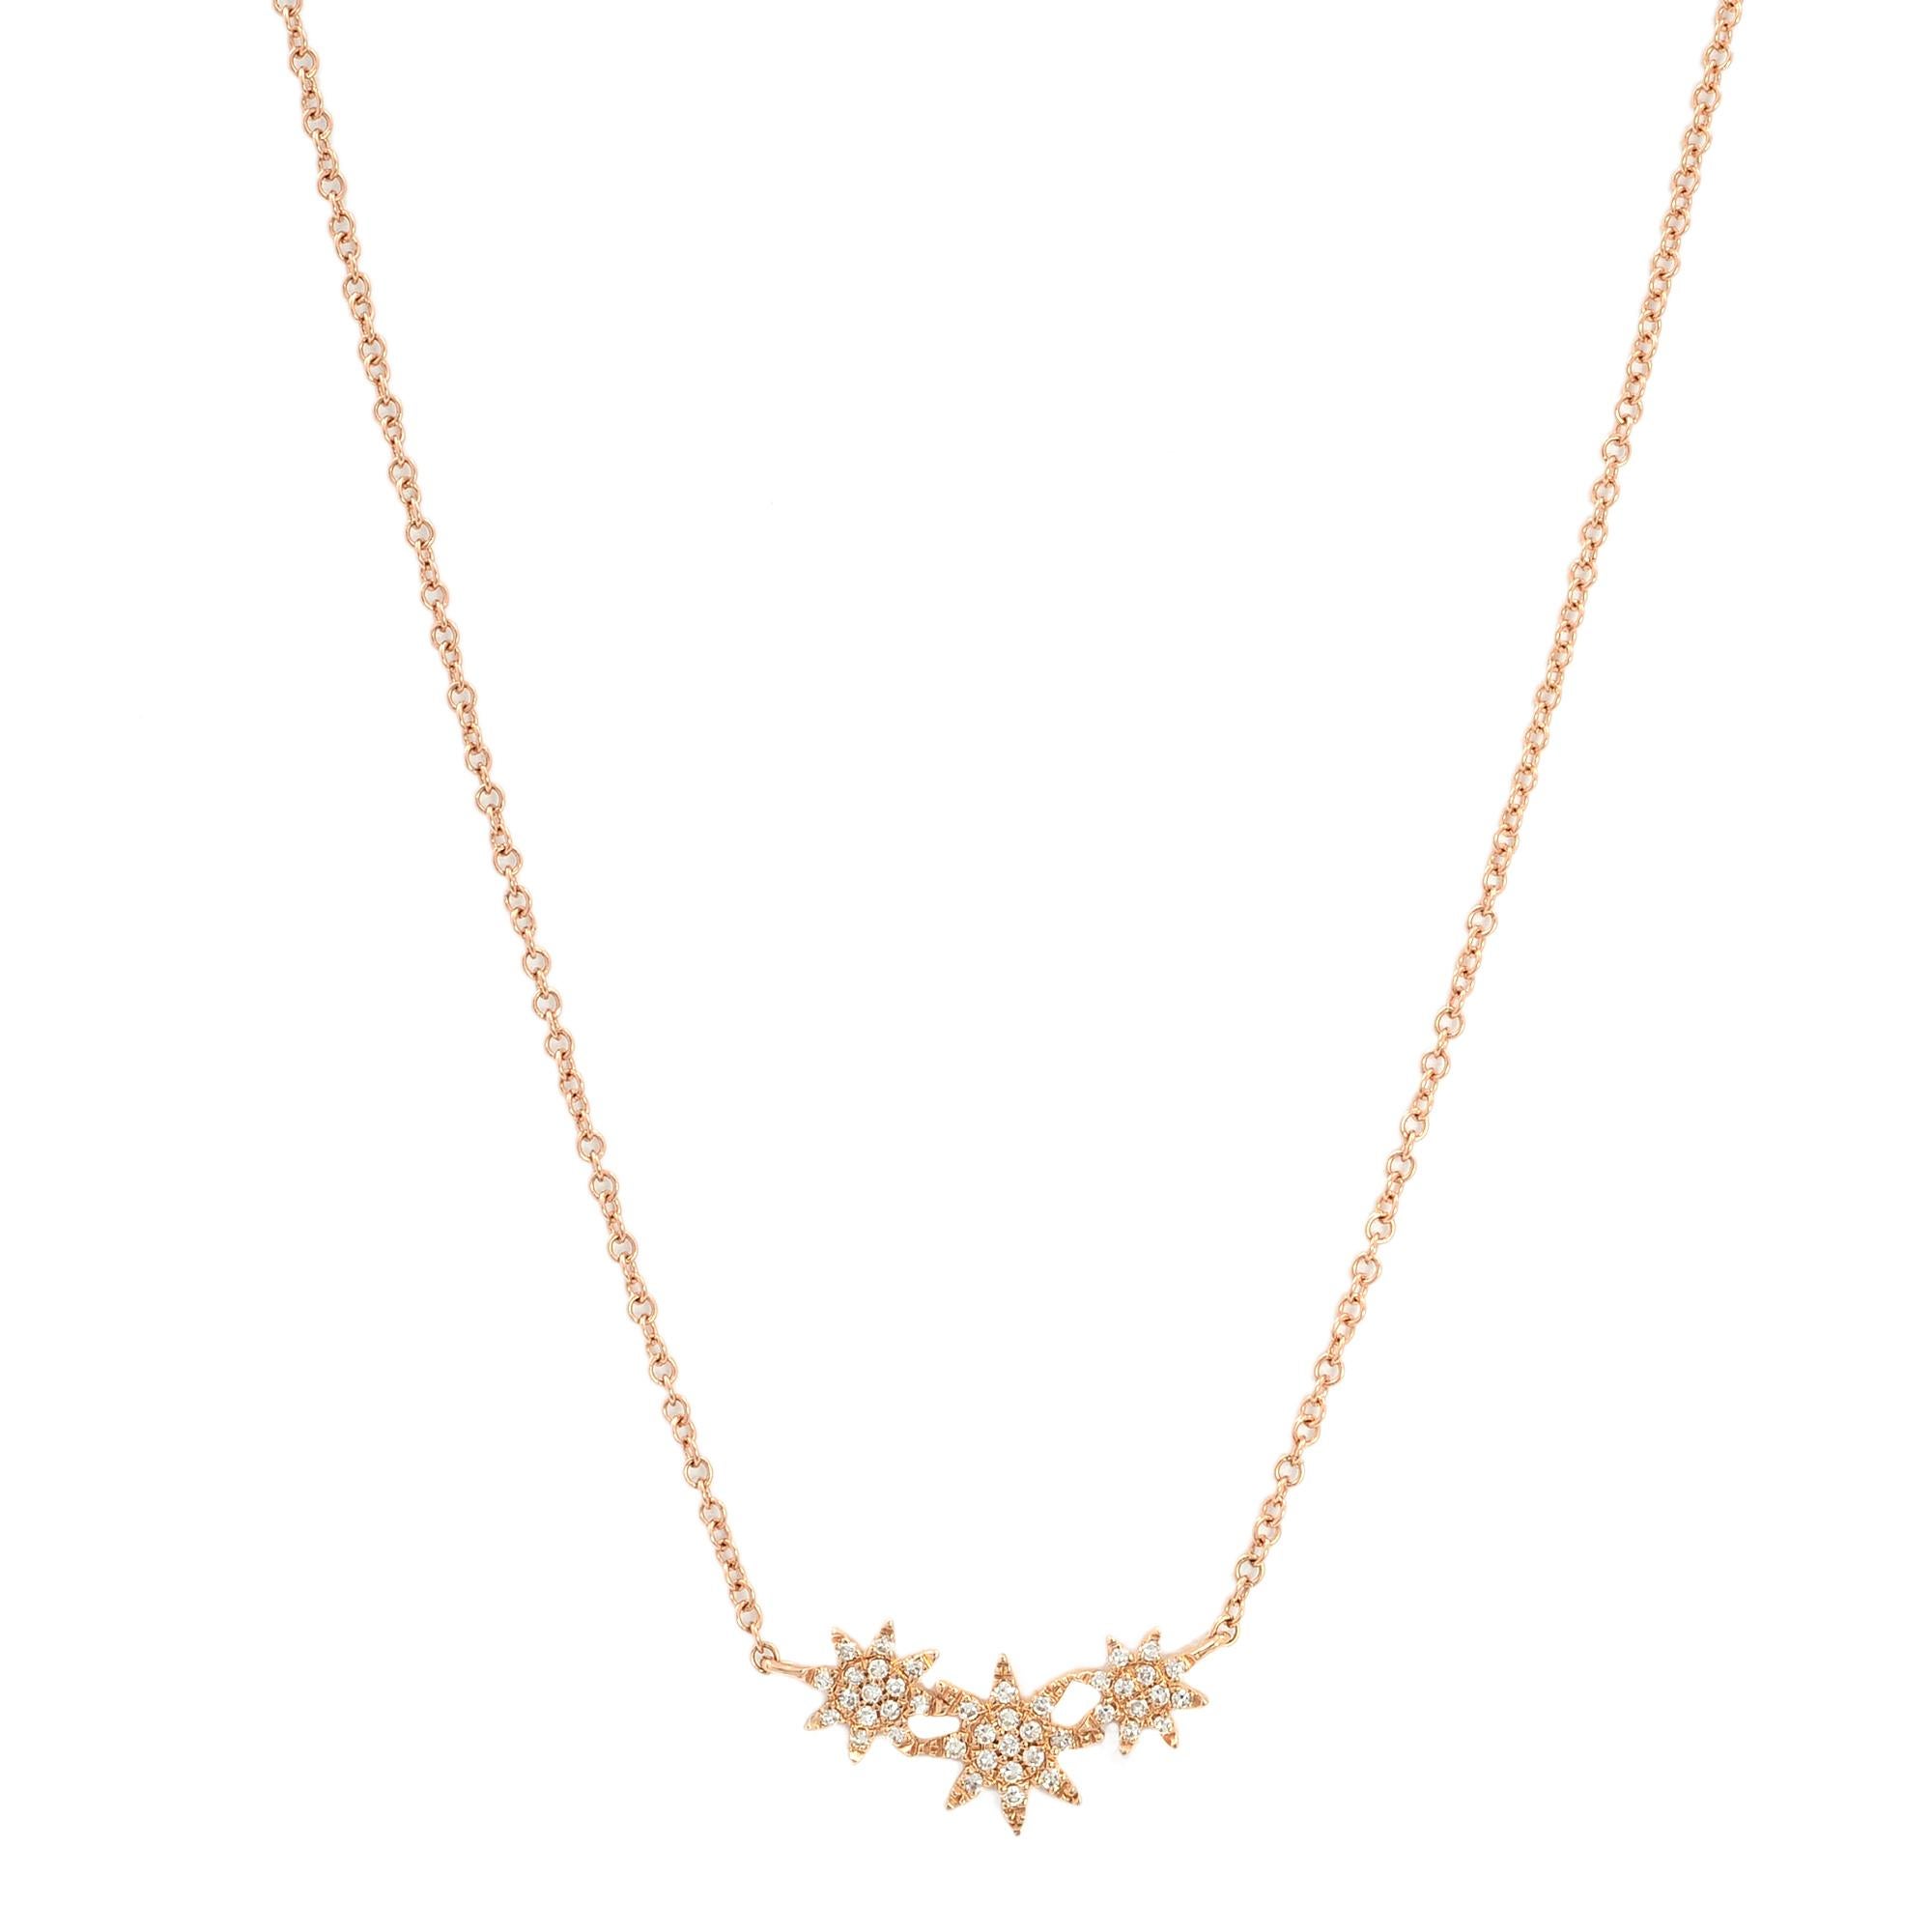 Rachel Koen Pave Diamond Mini Stars Necklace 14K Rose Gold 0.09cttw In New Condition For Sale In New York, NY